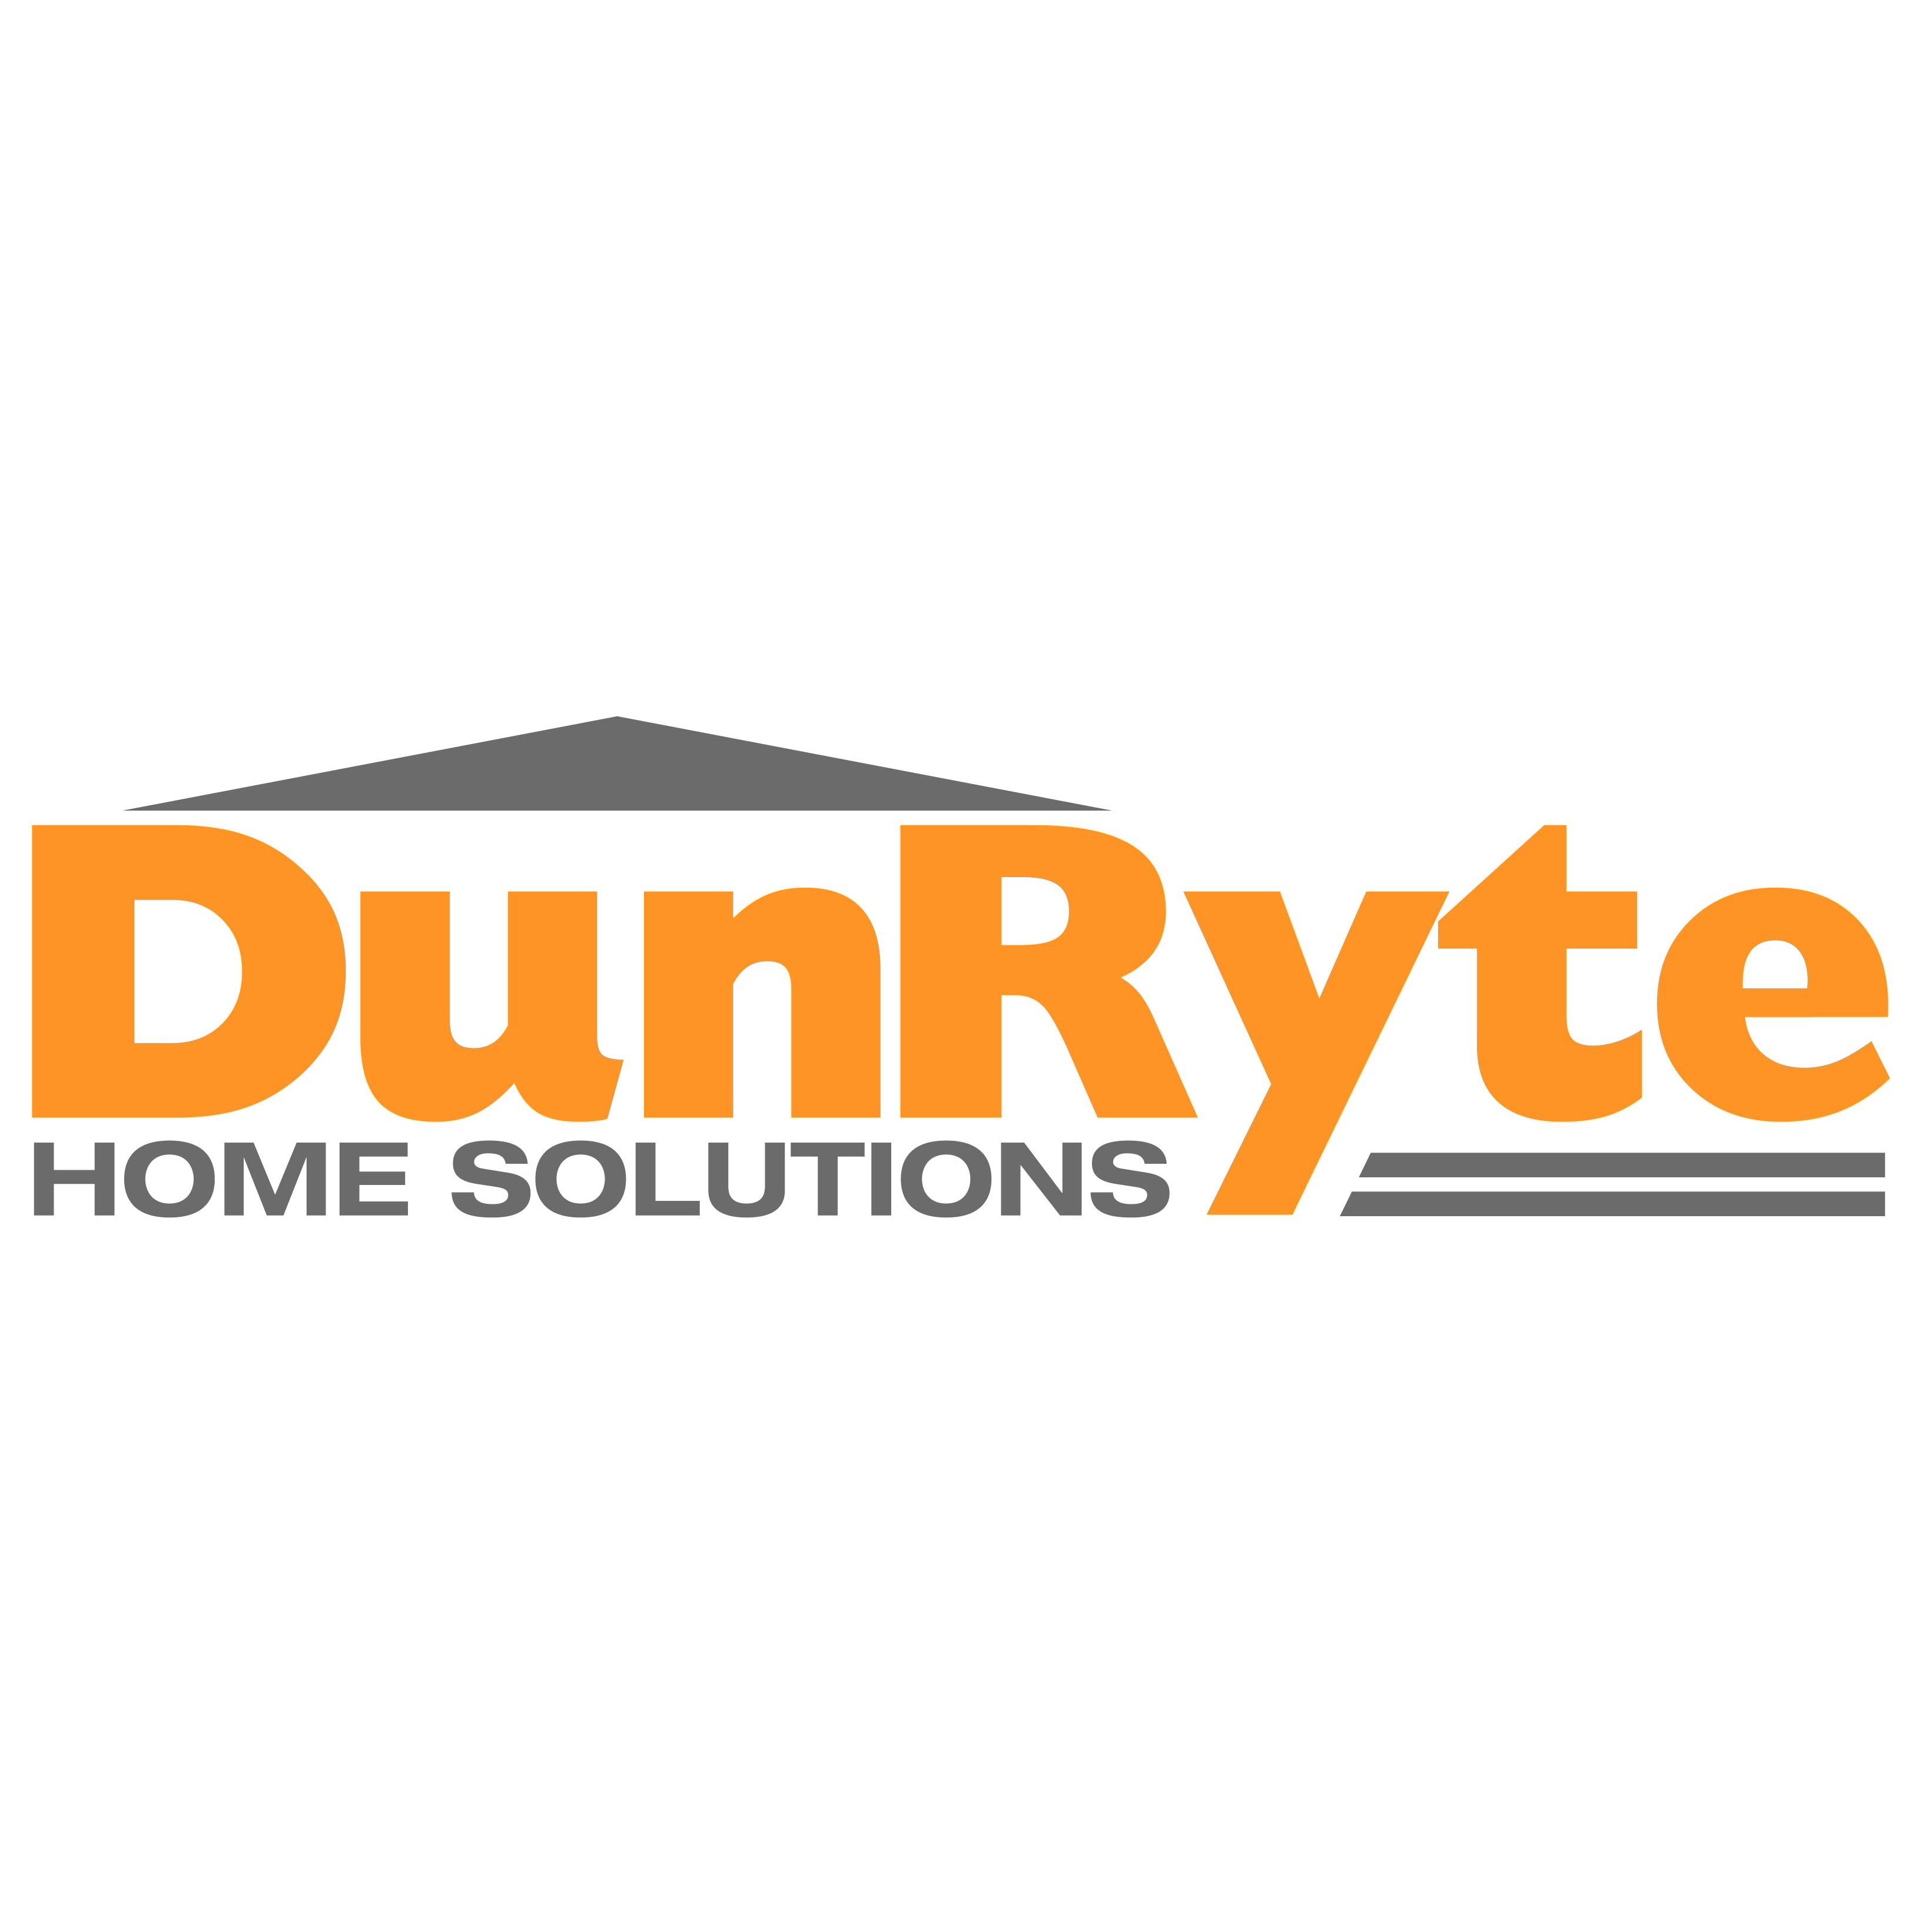 DunRyte Home Solutions Photo